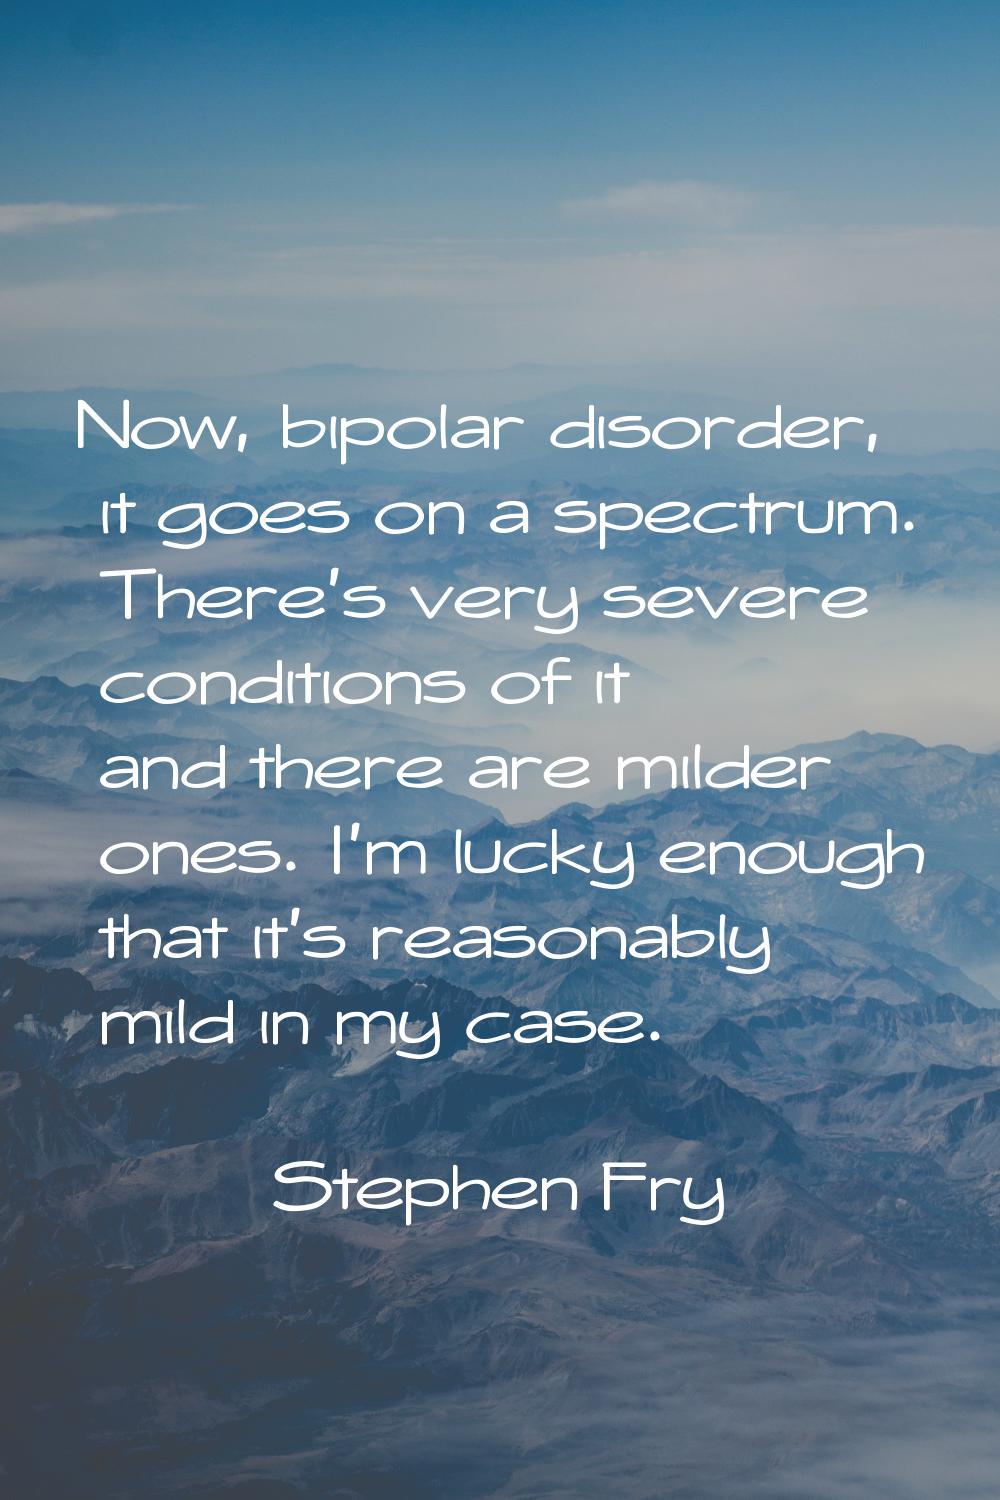 Now, bipolar disorder, it goes on a spectrum. There's very severe conditions of it and there are mi